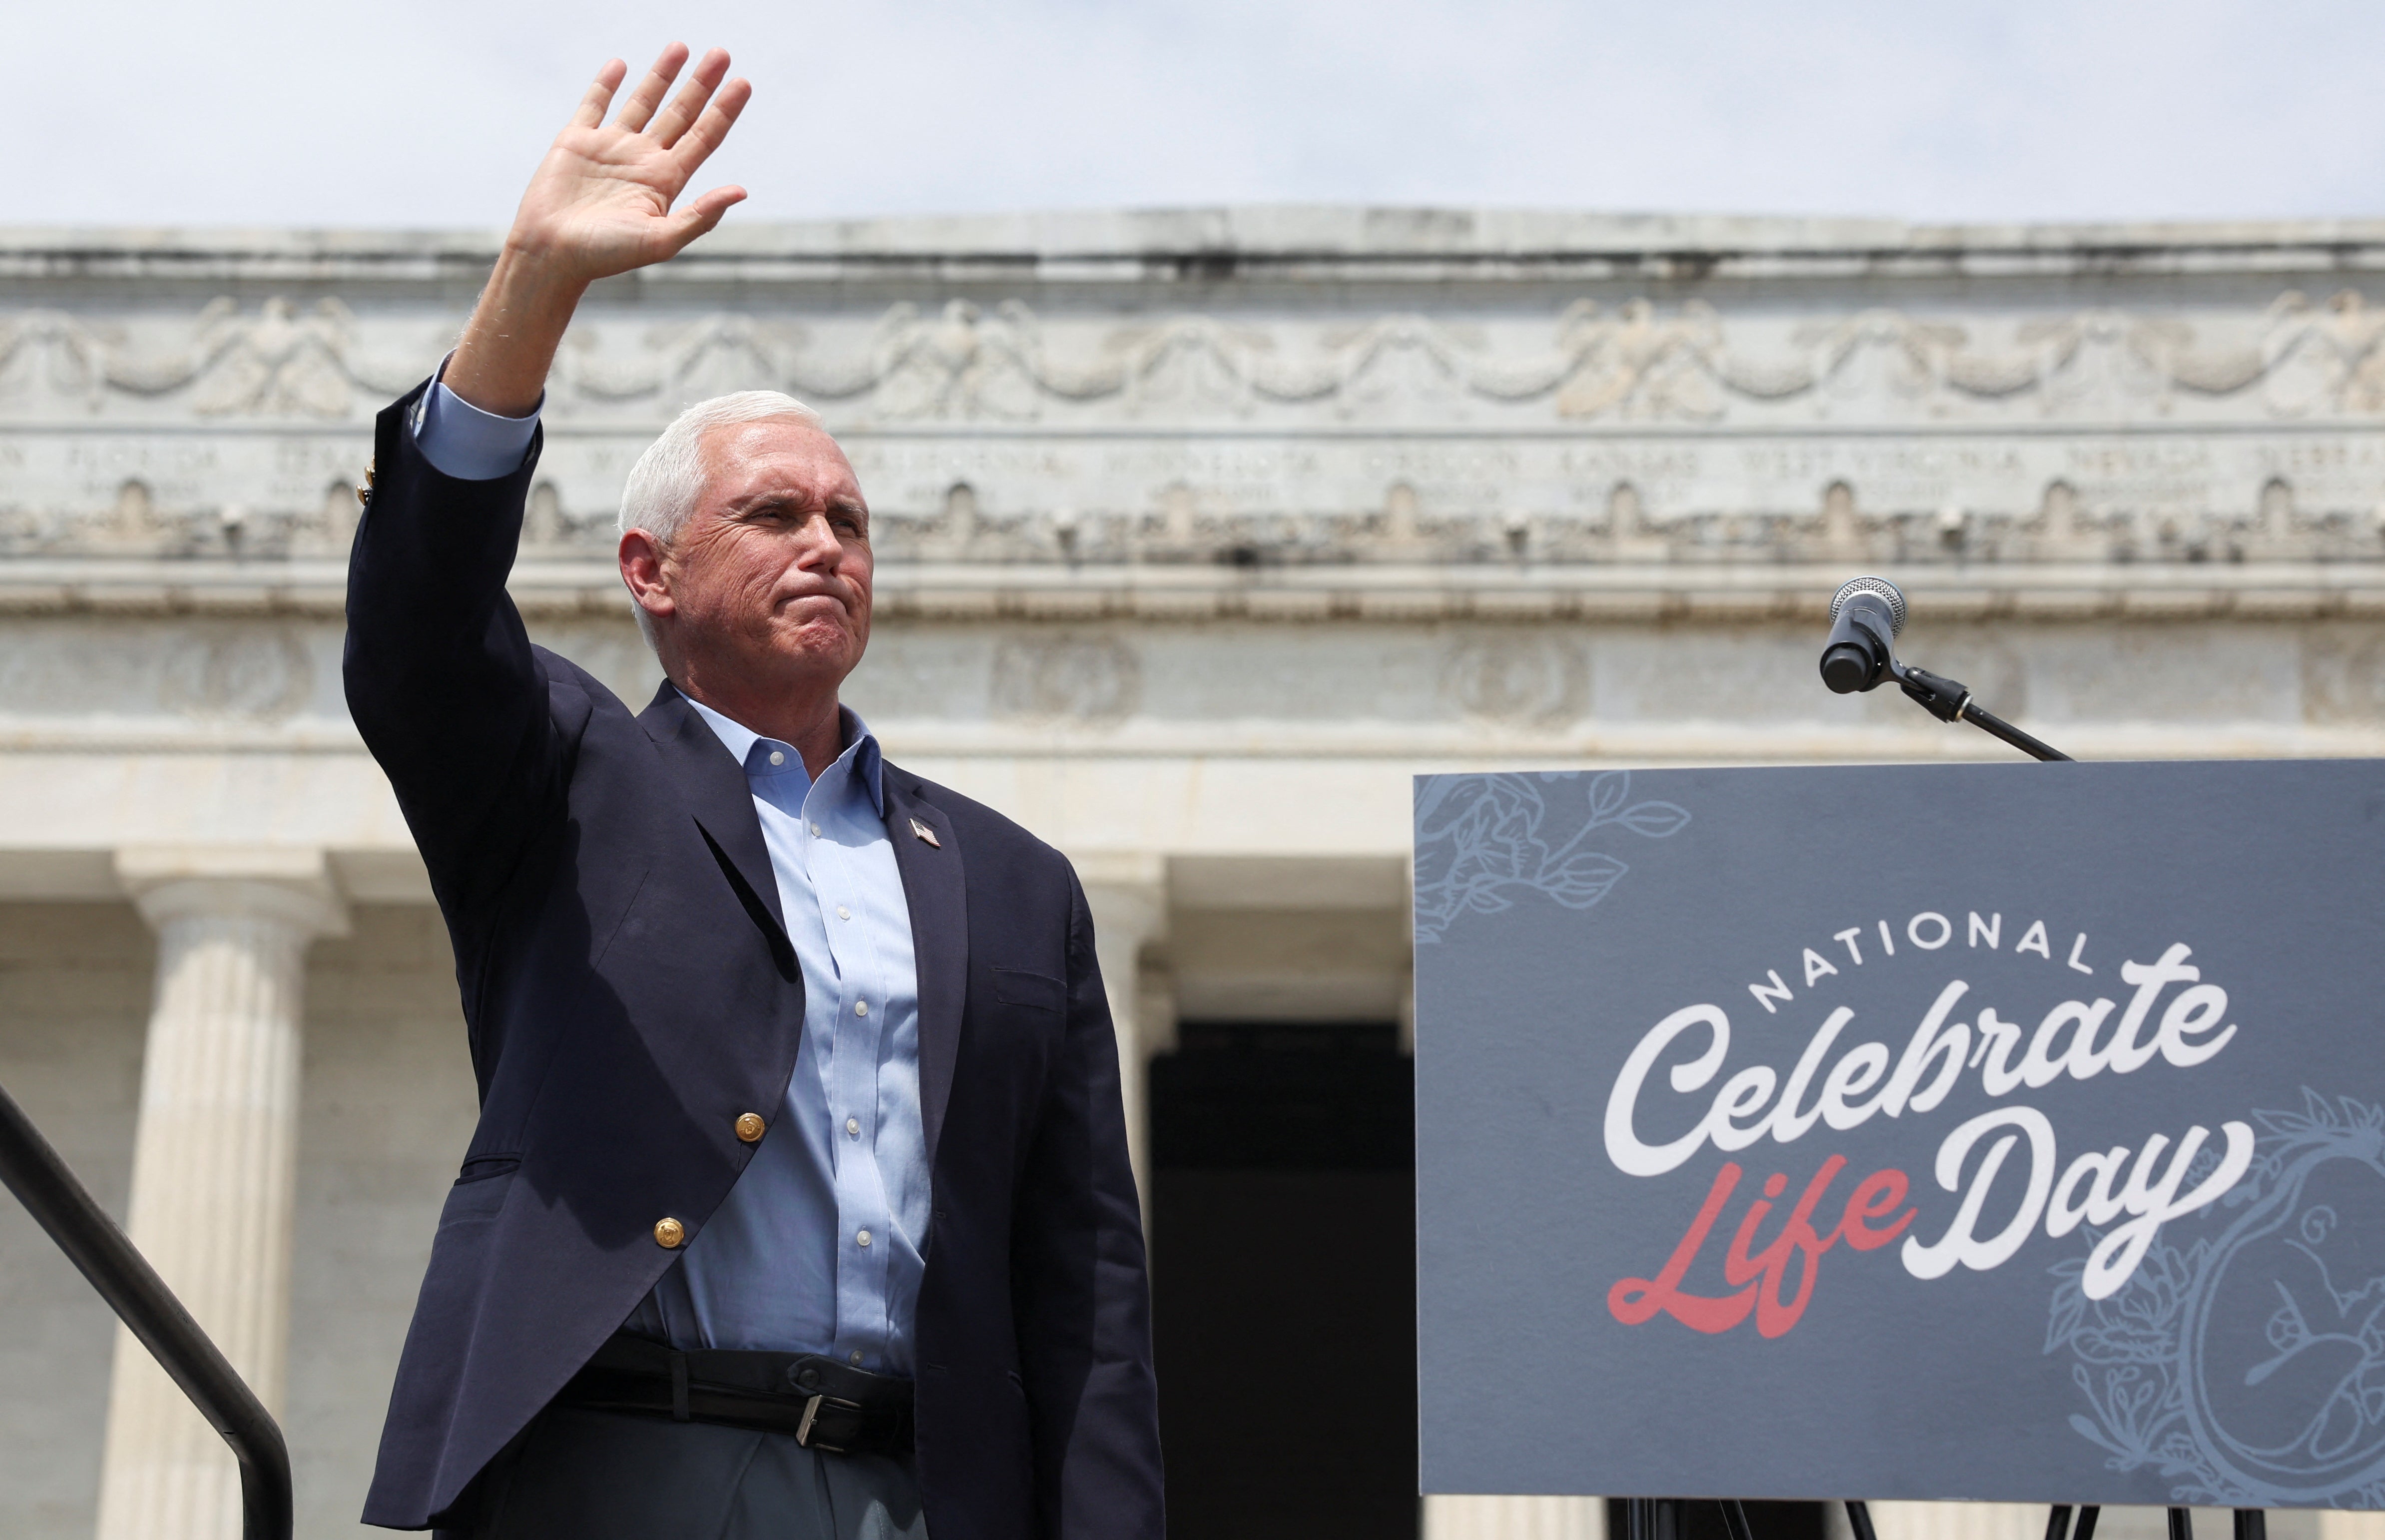 Mike Pence, among candidates vying for the 2024 Republican nomination for president, speaks to anti-abortion supporters in Washington DC on 24 June.